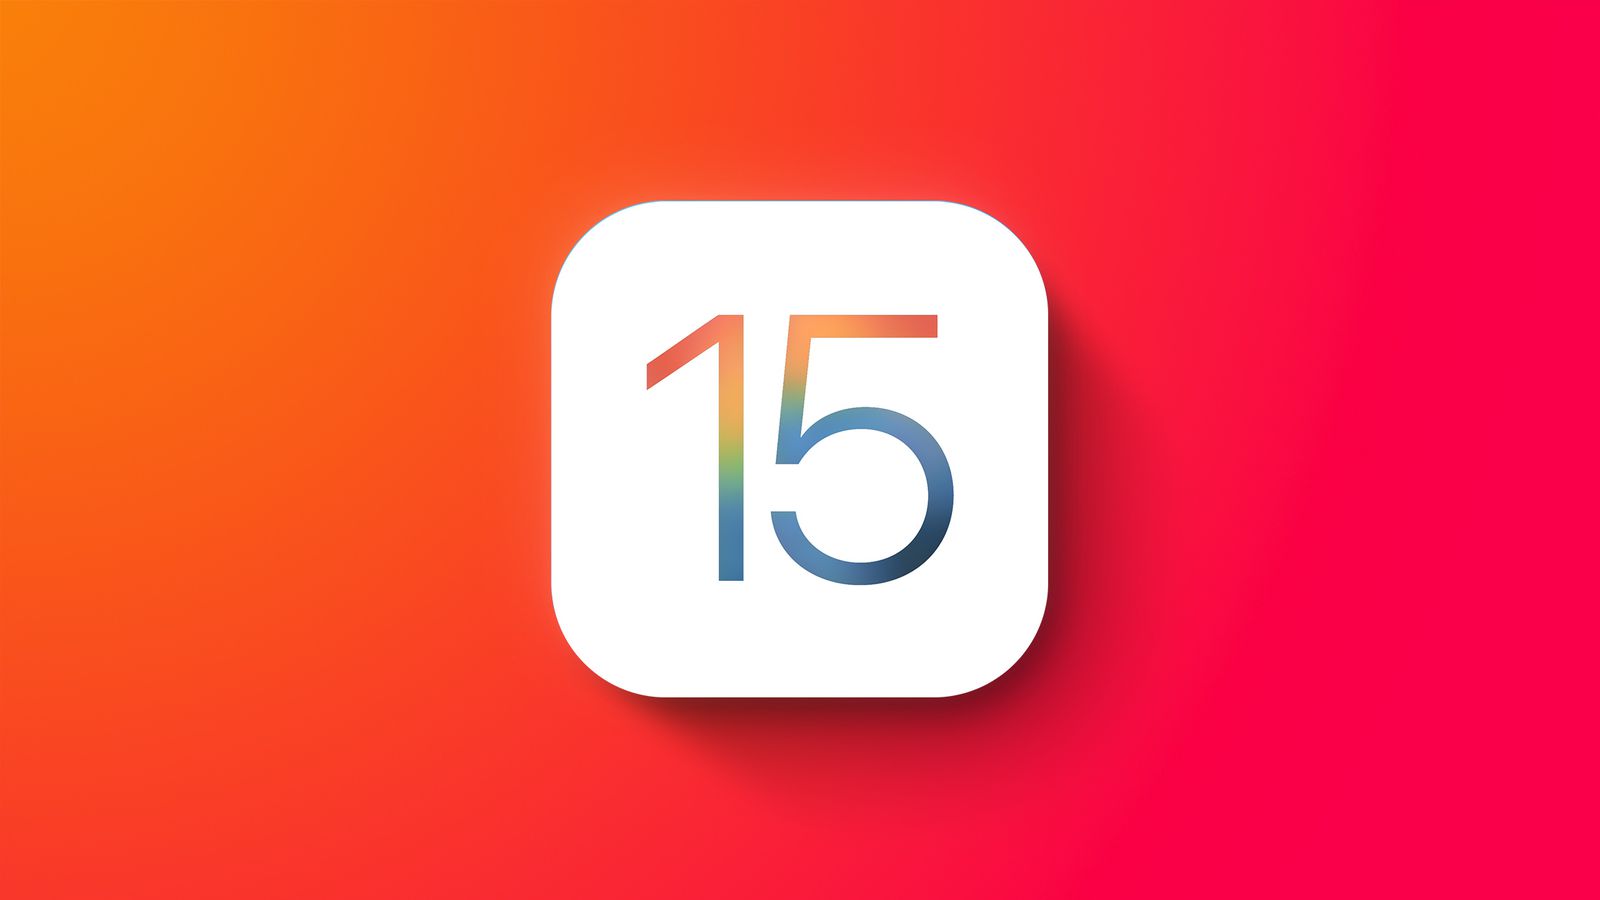 Apple has released iOS 15.1.1 update for iPhone 12 and iPhone 13 owners